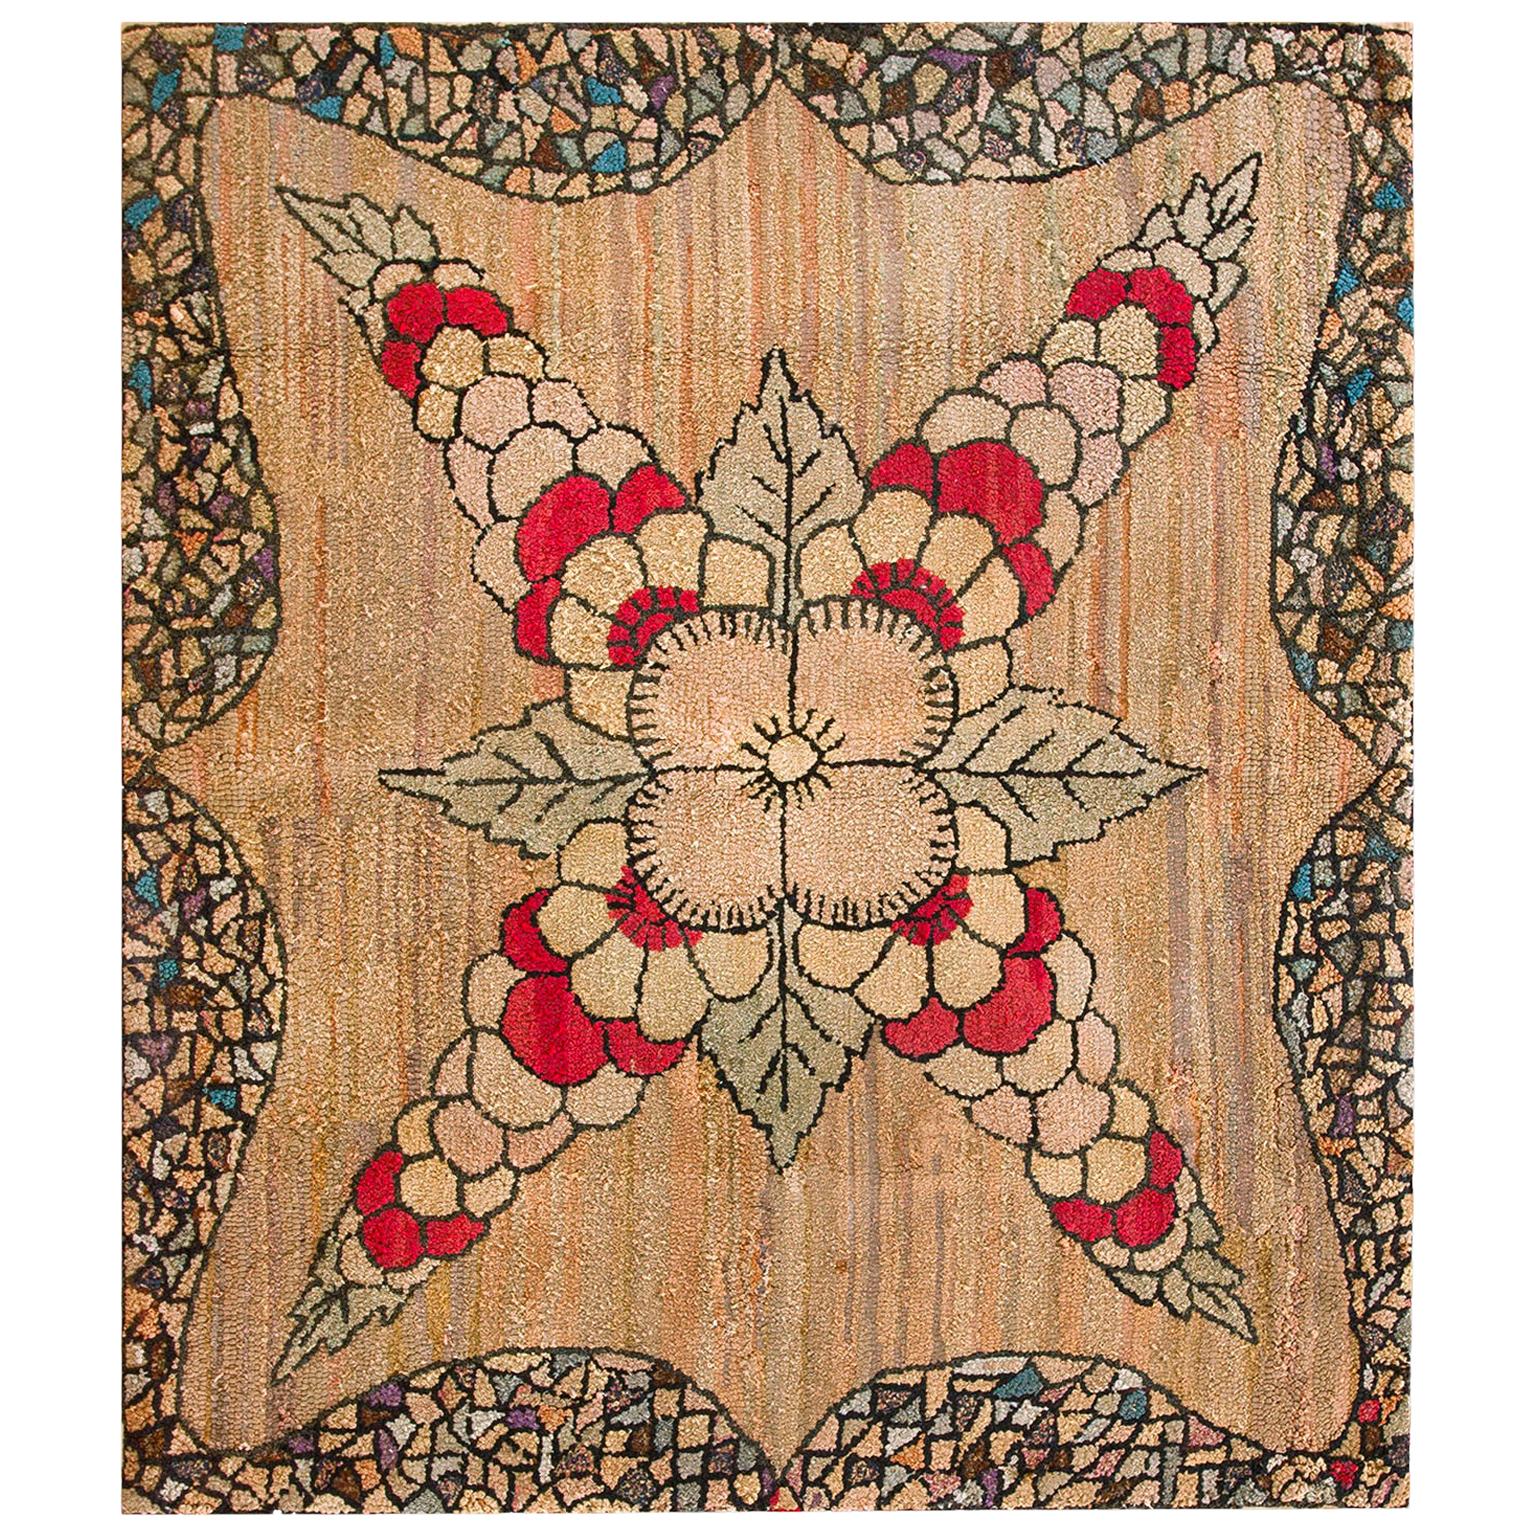 Antique American Hooked Rug 3' 0" x 3' 5" For Sale